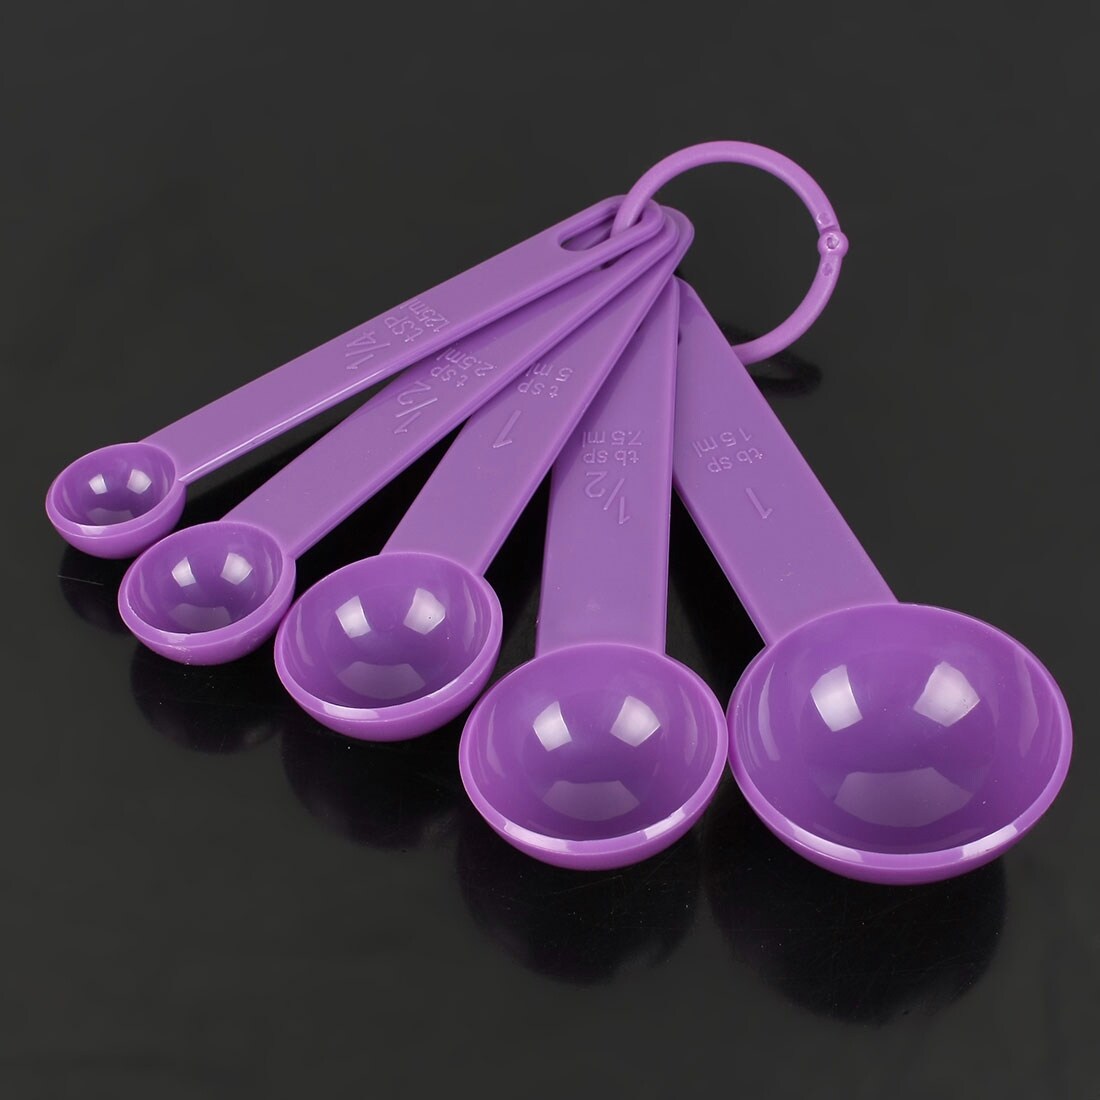 https://ak1.ostkcdn.com/images/products/is/images/direct/76dbb09a519ba35ad54bf5d10c4cc89c679f48d9/Home-Kitchen-Plastic-Tea-Soup-Coffee-Measuring-Spoon-Set-Purple-5-in-1.jpg